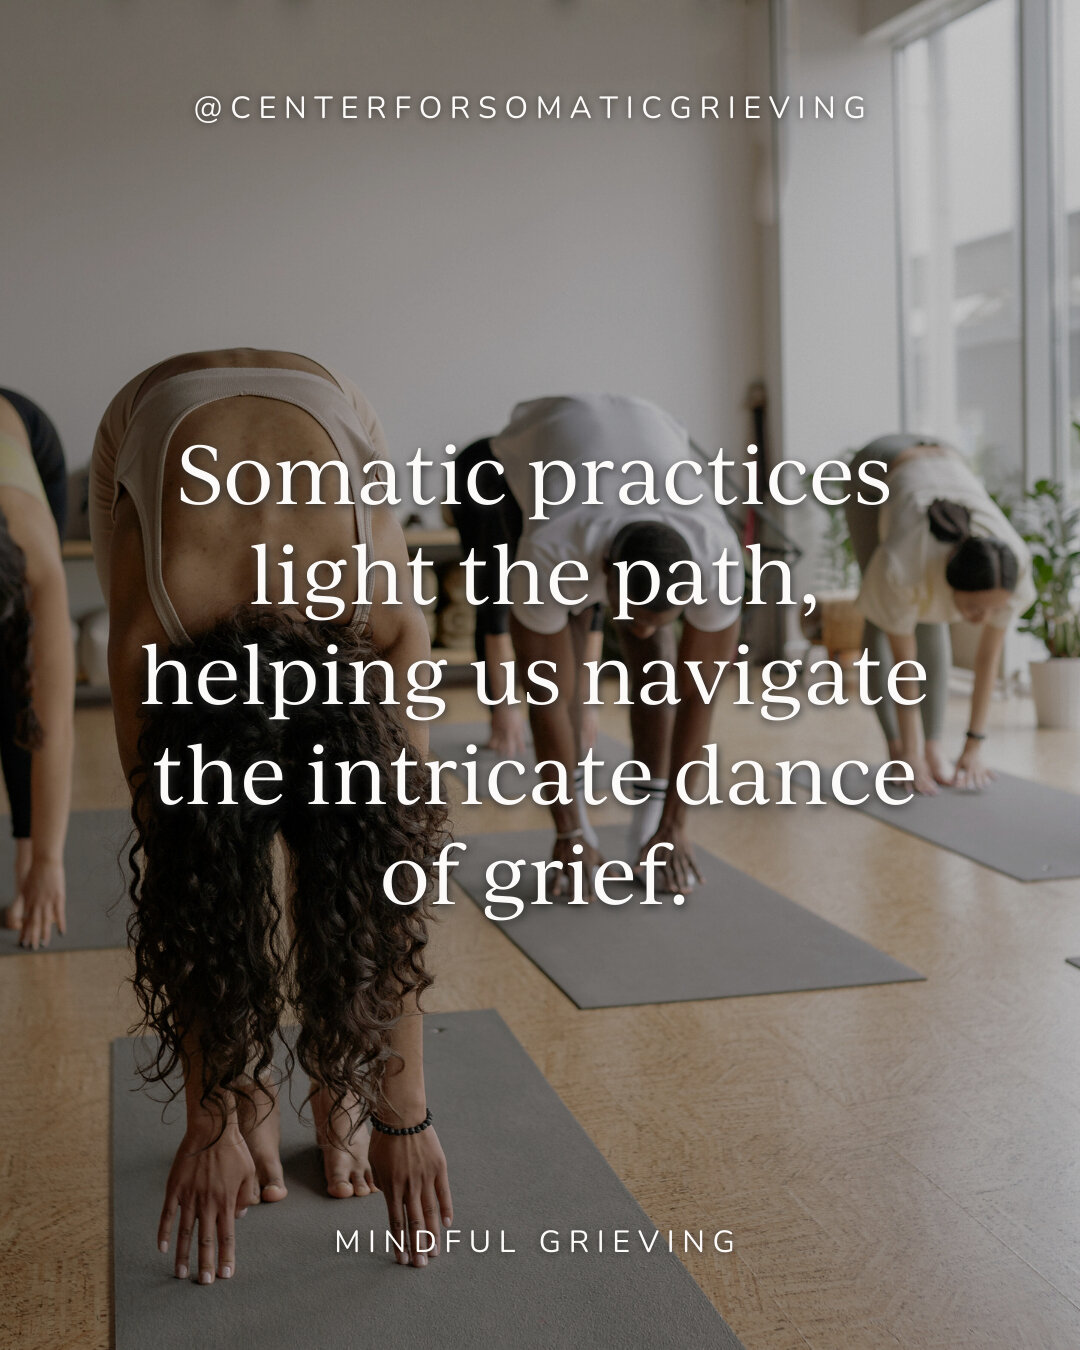 The body, in its wisdom, holds memories, emotions, and the echoes of our experiences. Somatic practices offer tools to connect with these bodily sensations, helping us process and release pent-up emotions. Through movement, awareness, and mindfulness